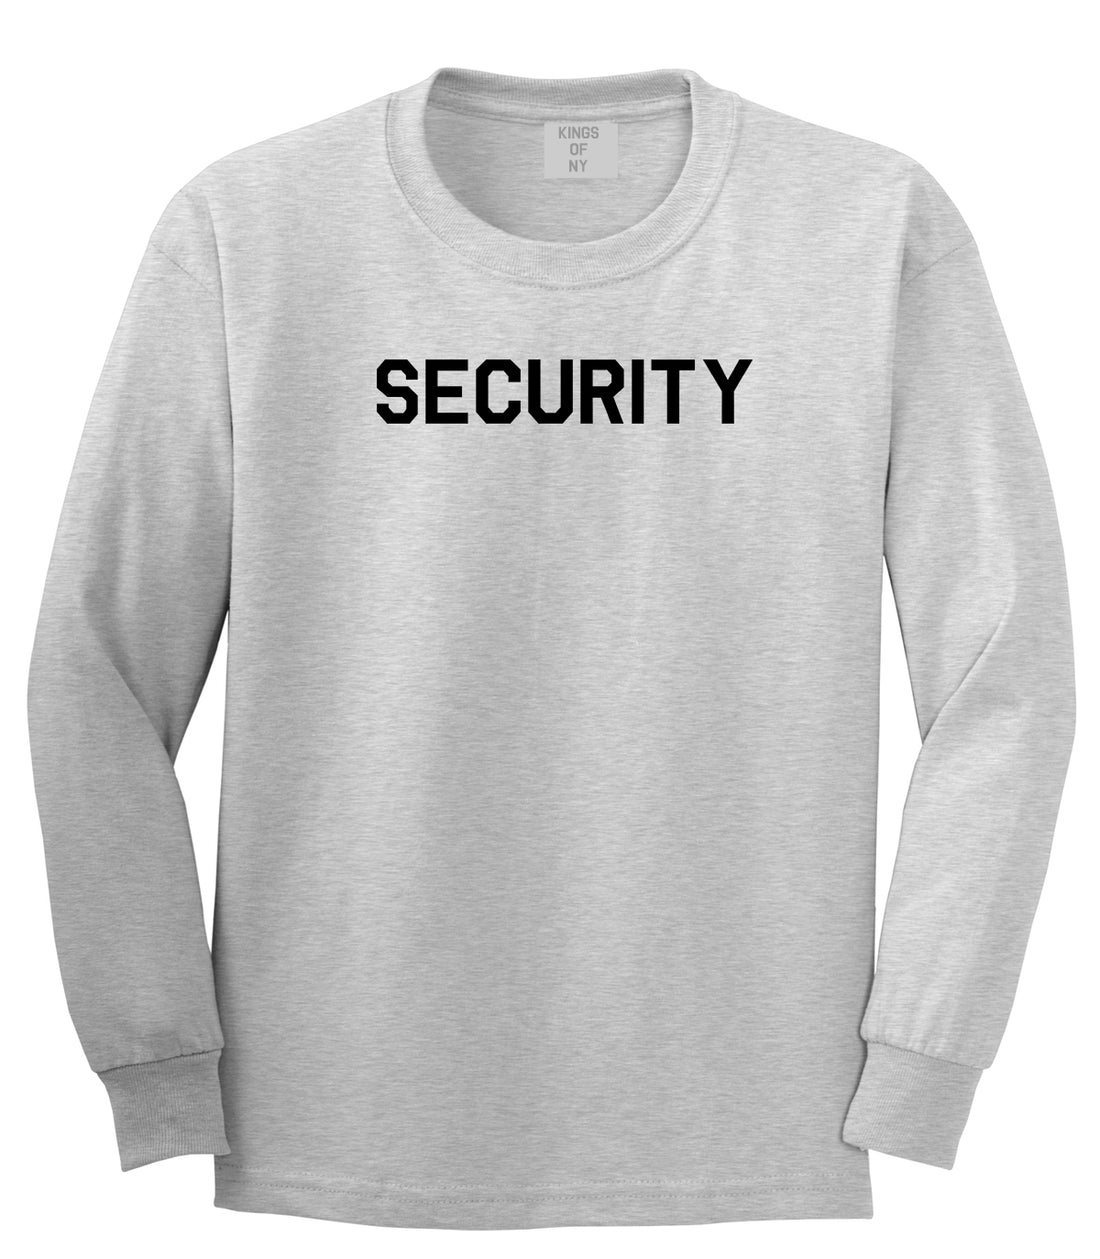 Event Security Uniform Mens Grey Long Sleeve T-Shirt by KINGS OF NY